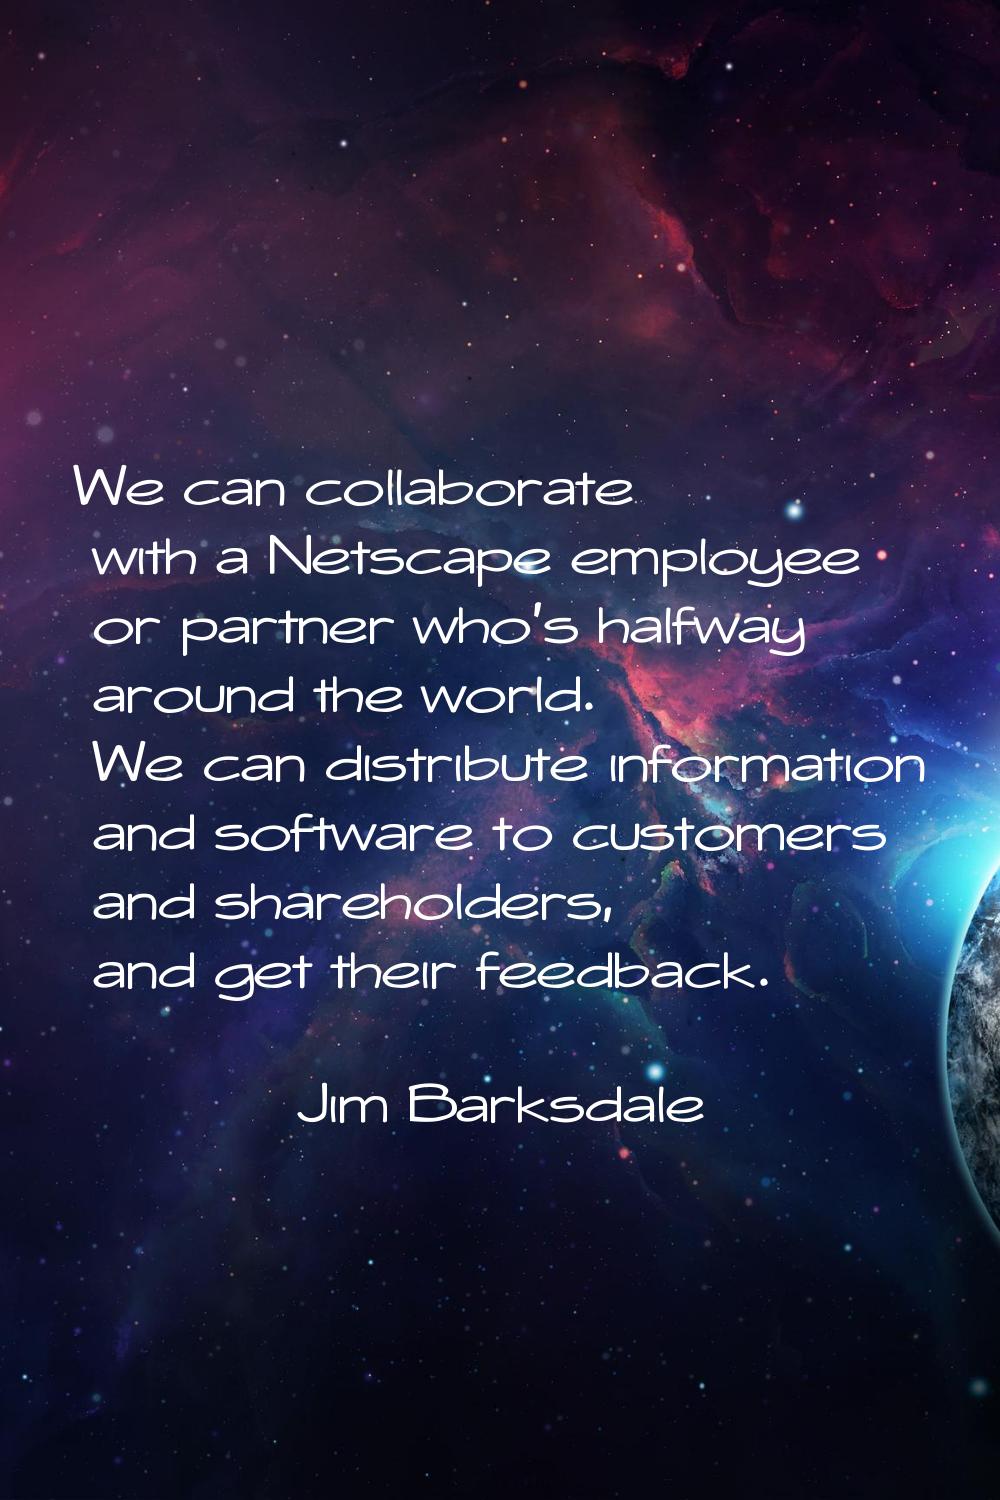 We can collaborate with a Netscape employee or partner who's halfway around the world. We can distr